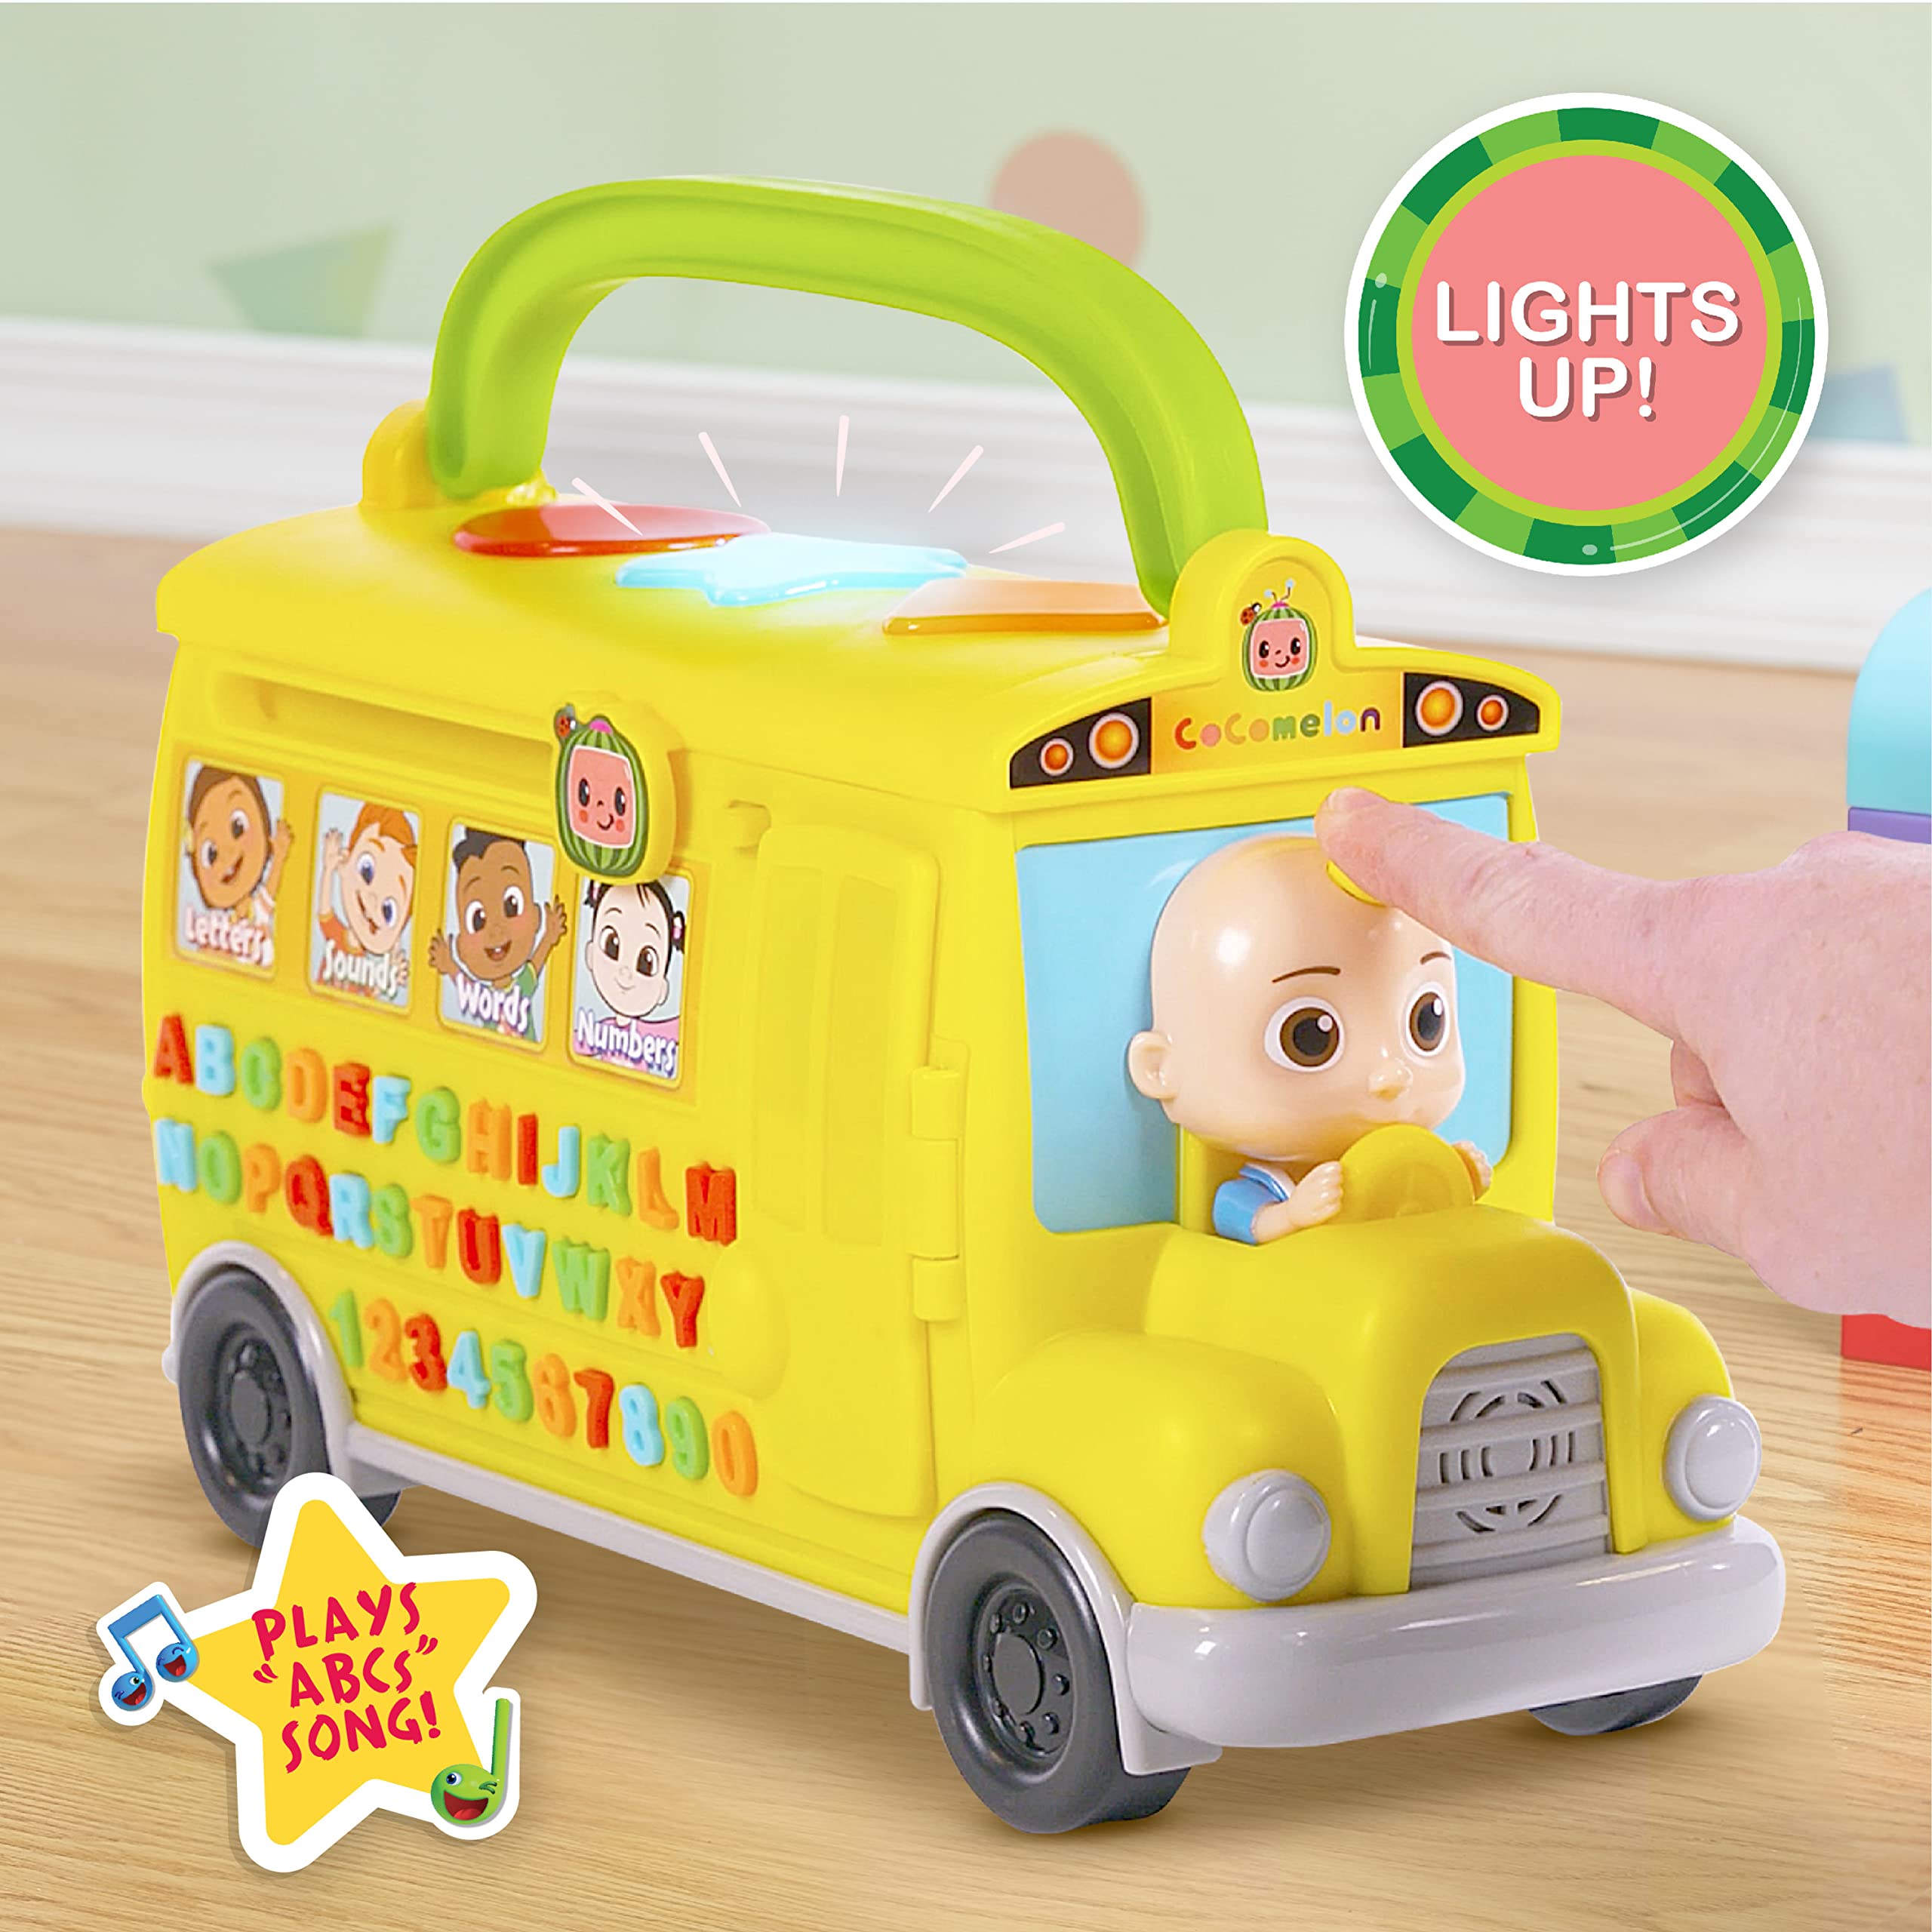 CoComelon Musical Learning Bus, Number and Letter Recognition, Phonetics, Yellow School Bus Toy Plays ABCs and Wheels on the Bus, Officially Licensed Kids Toys for Ages 18 Month by Just Play